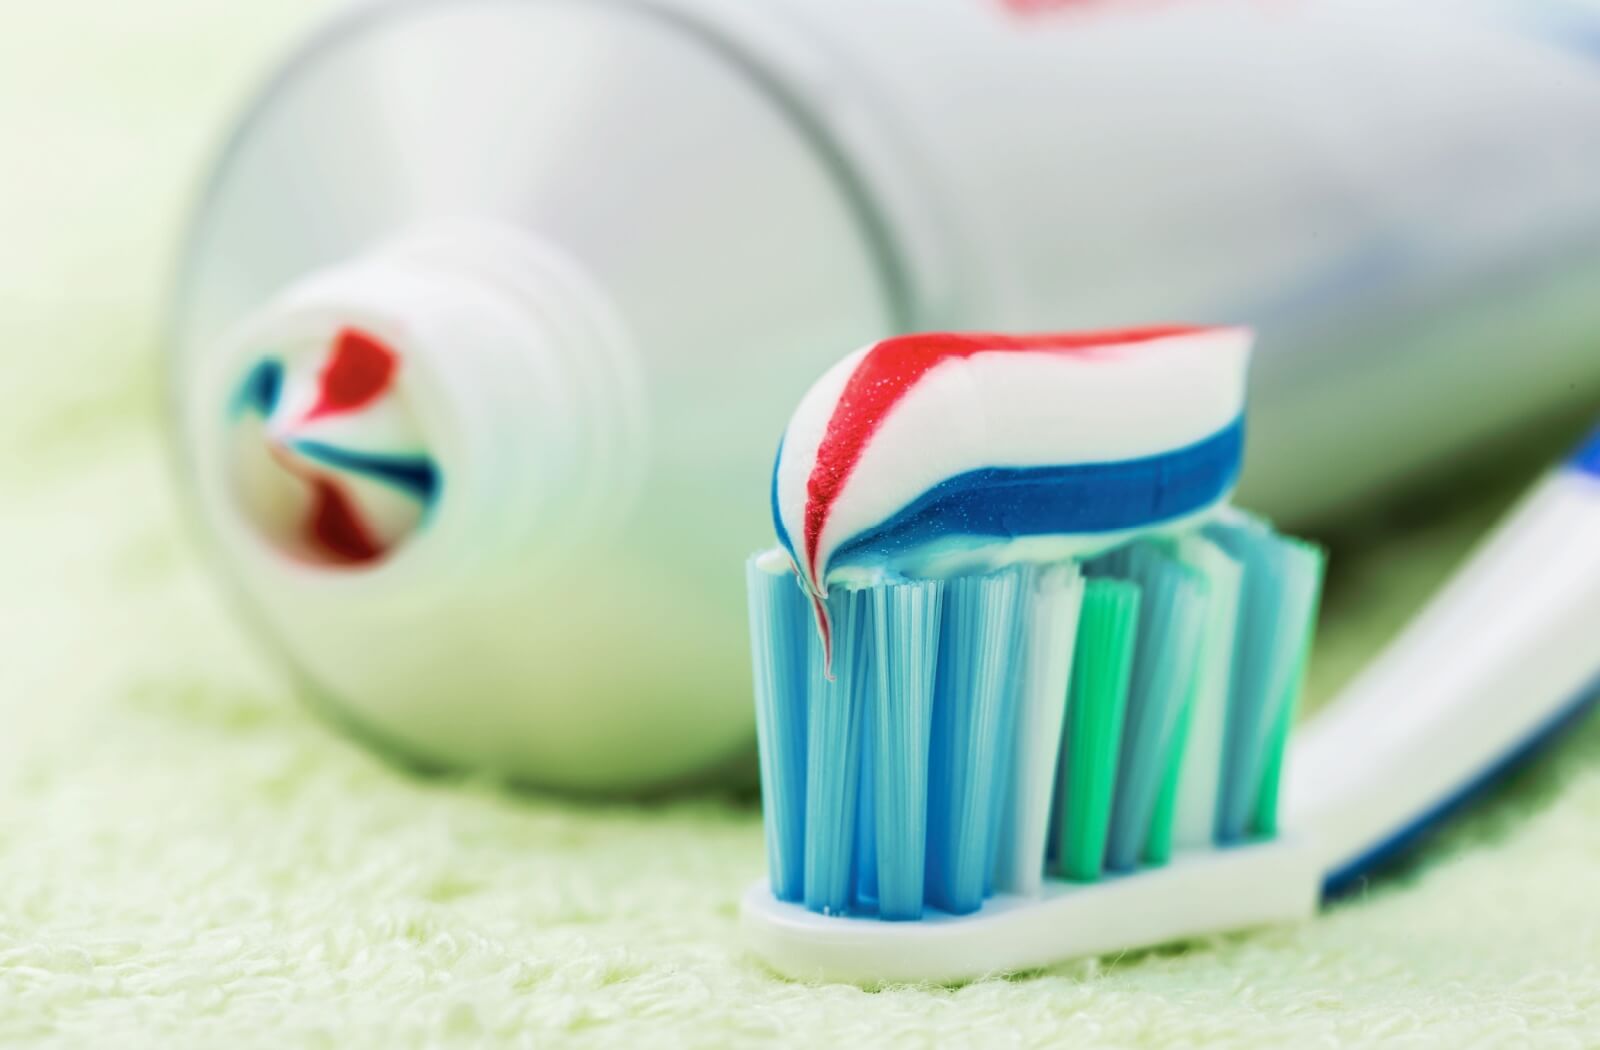 A close-up of a small of dab of fluoride toothpaste on a toothbrush.
